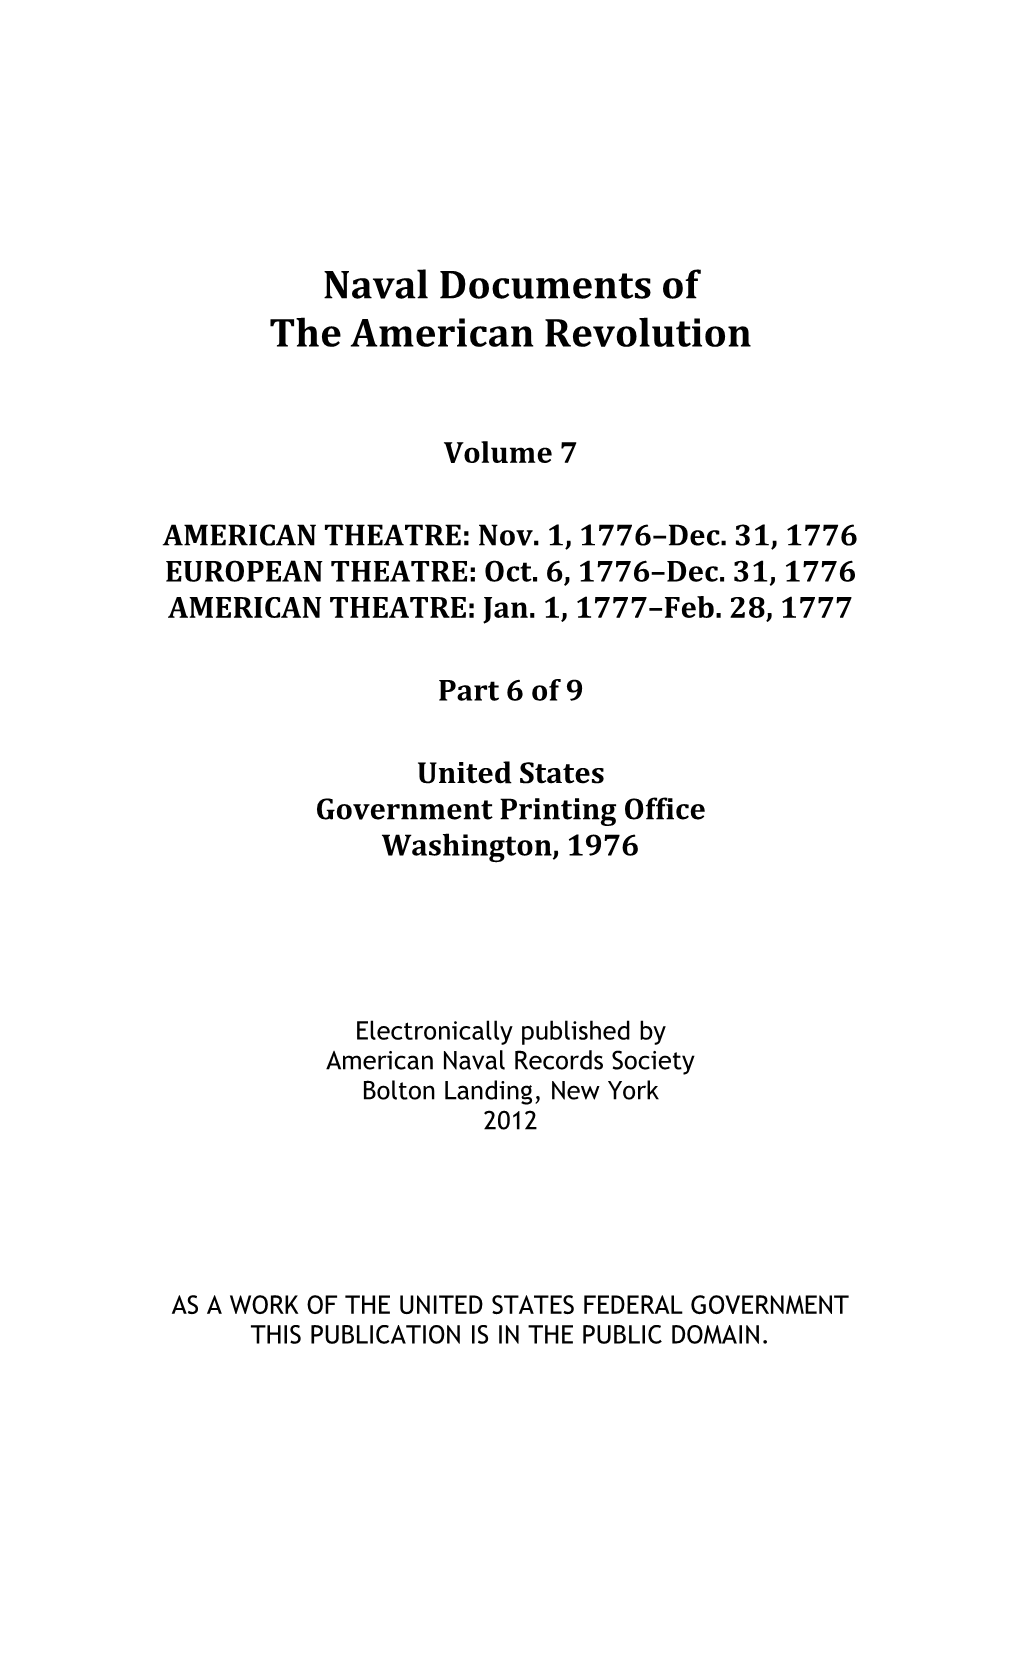 Naval Documents of the American Revolution, Volume 7, Part 6